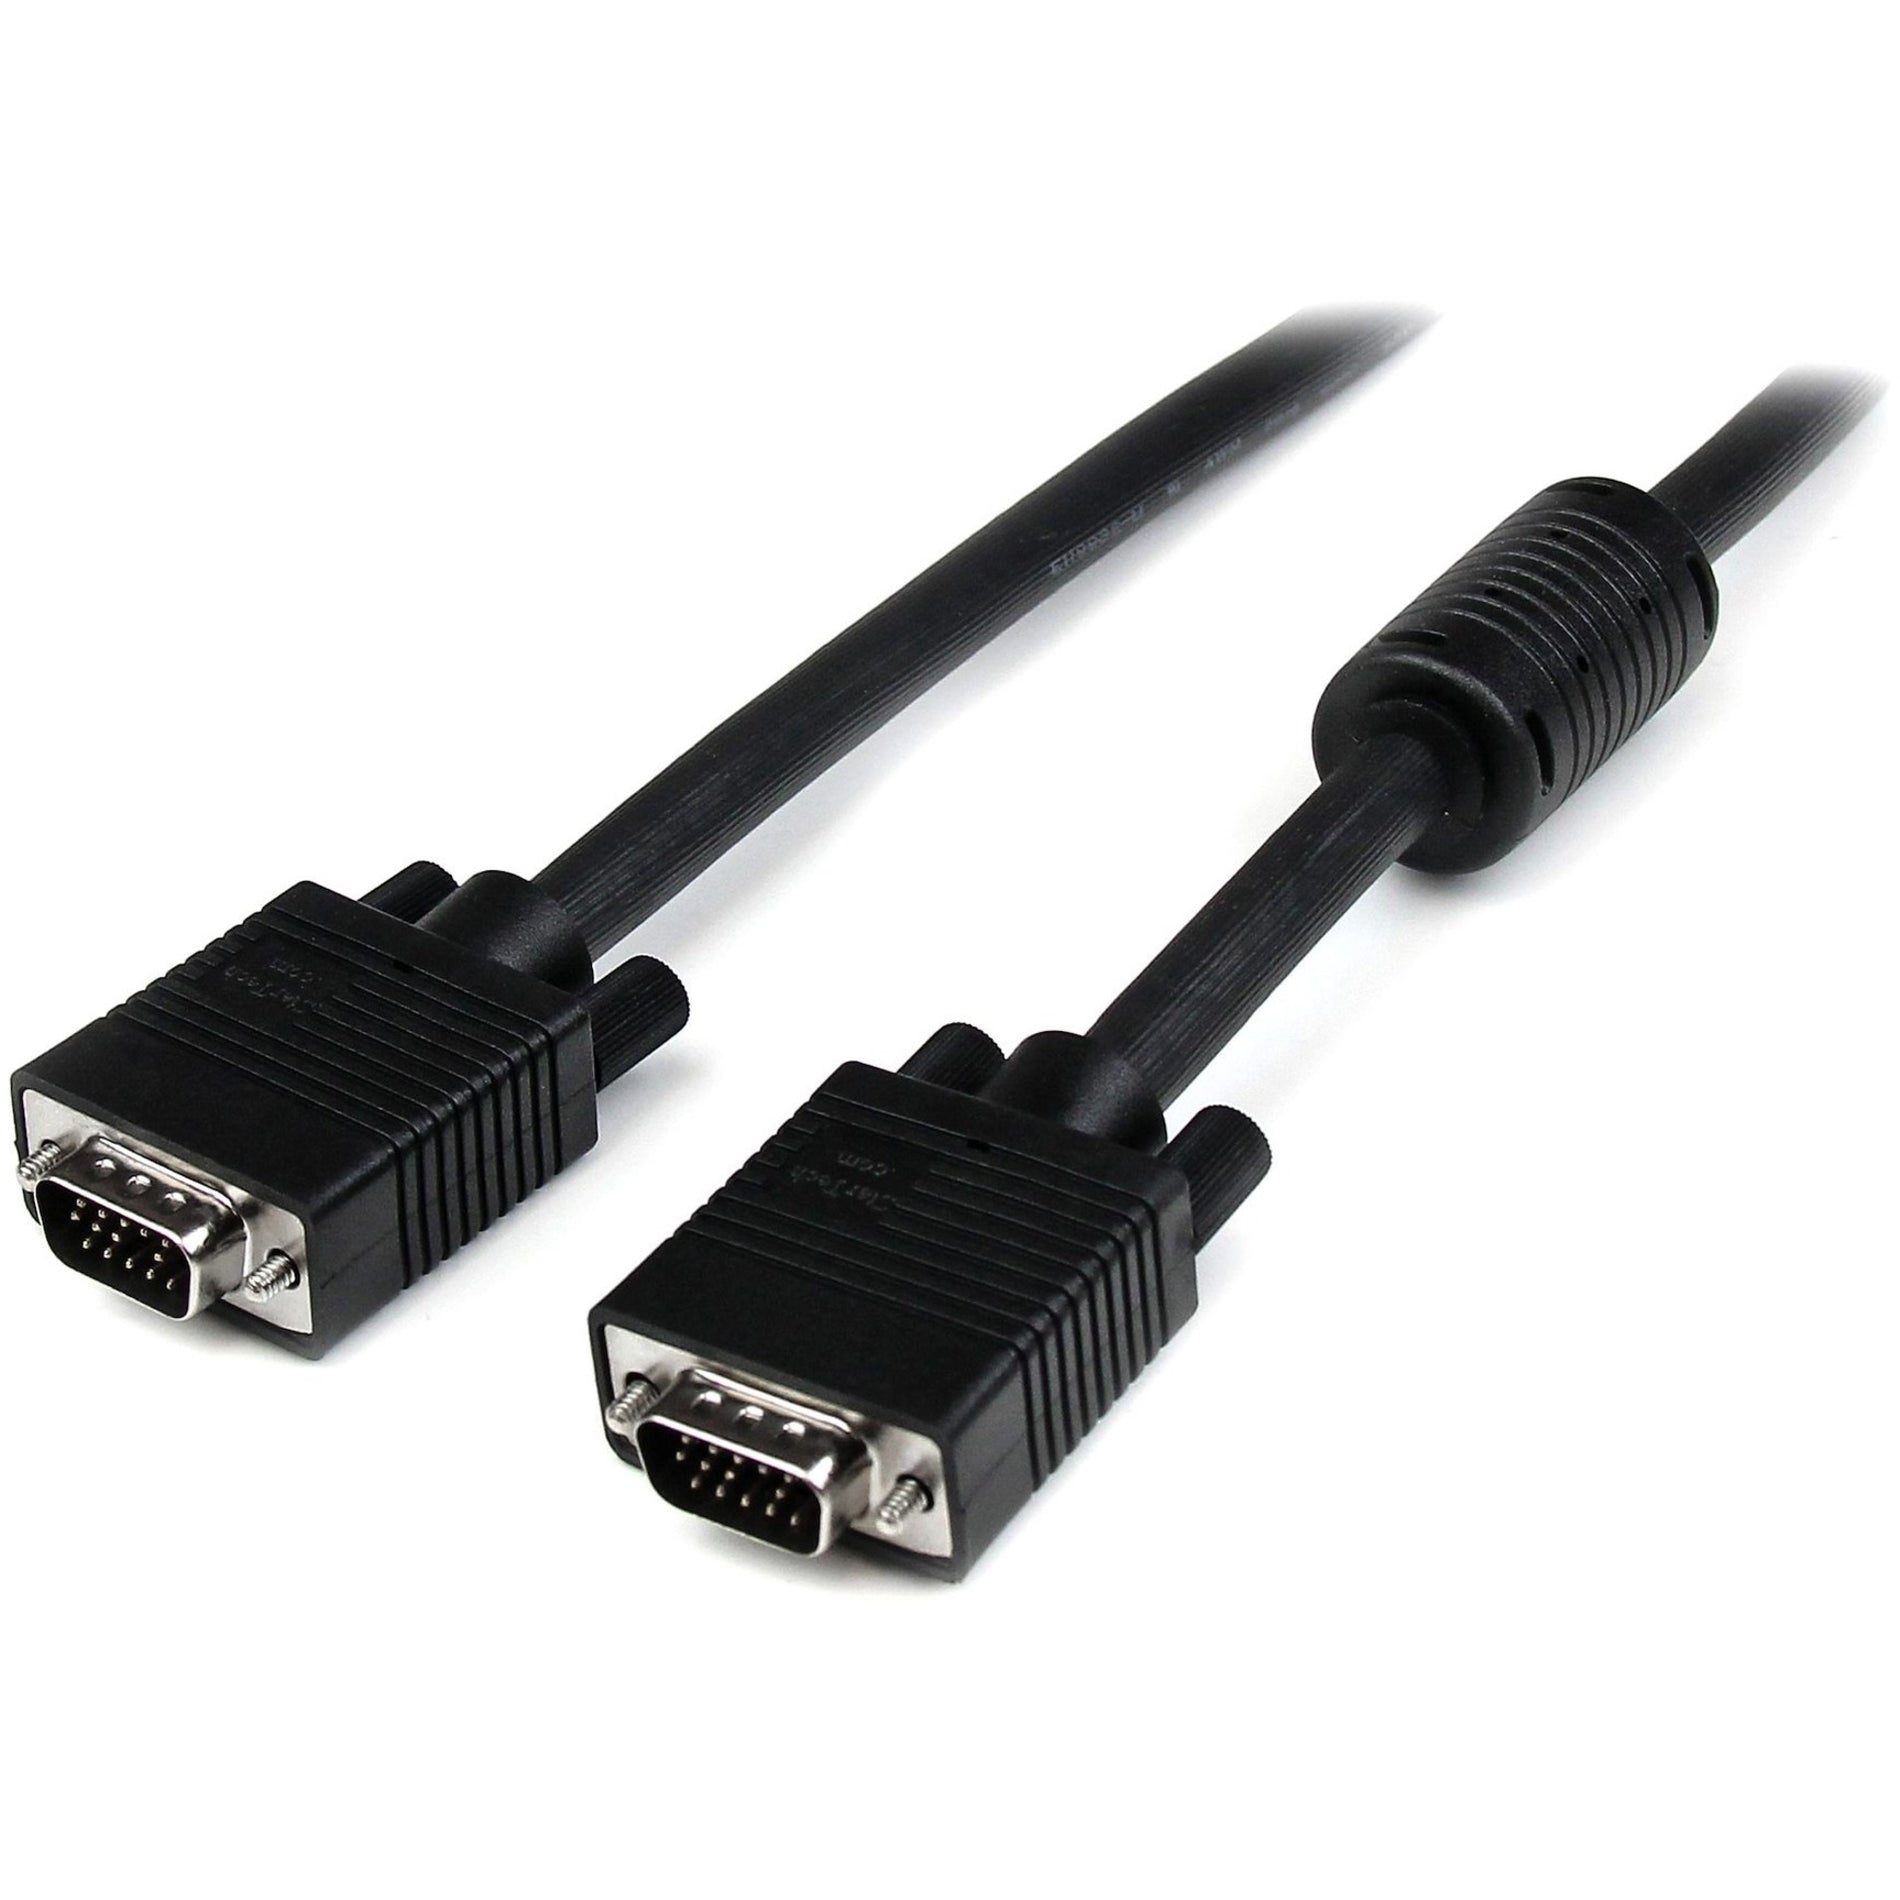 StarTech.com MXT101MMHQ55 55 ft Coax High Resolution VGA Monitor Cable - HD15 M/M, Lifetime Warranty, CMG Rated